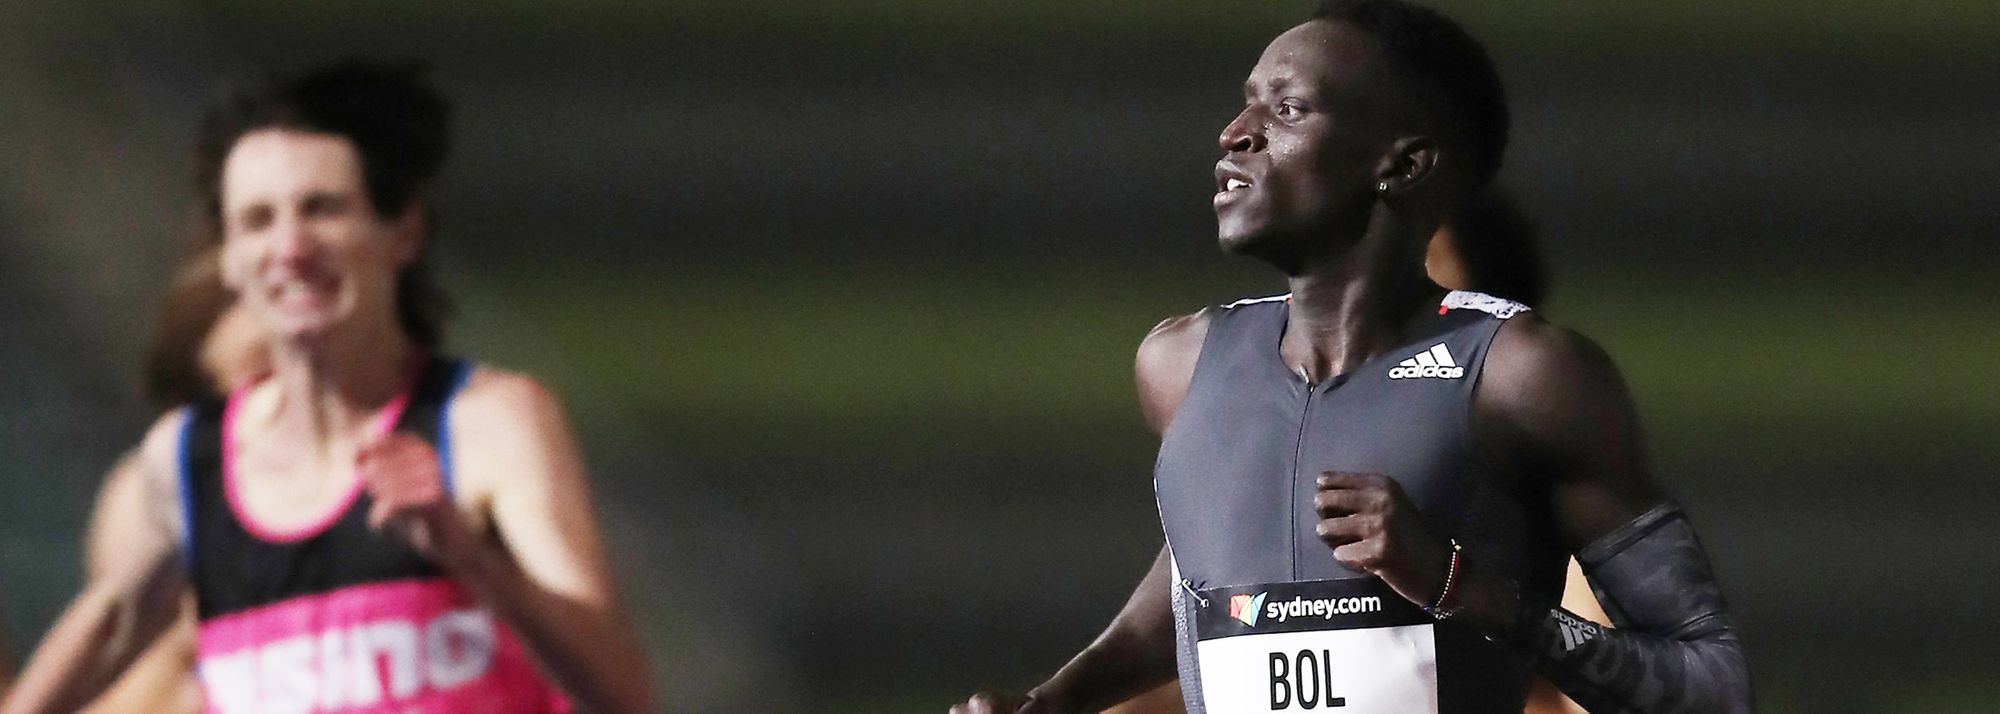 Australia's Olympic finalist Peter Bol has been announced as one of five additions to take on Jake Wightman and Stewart McSweyn in the John Landy Mile